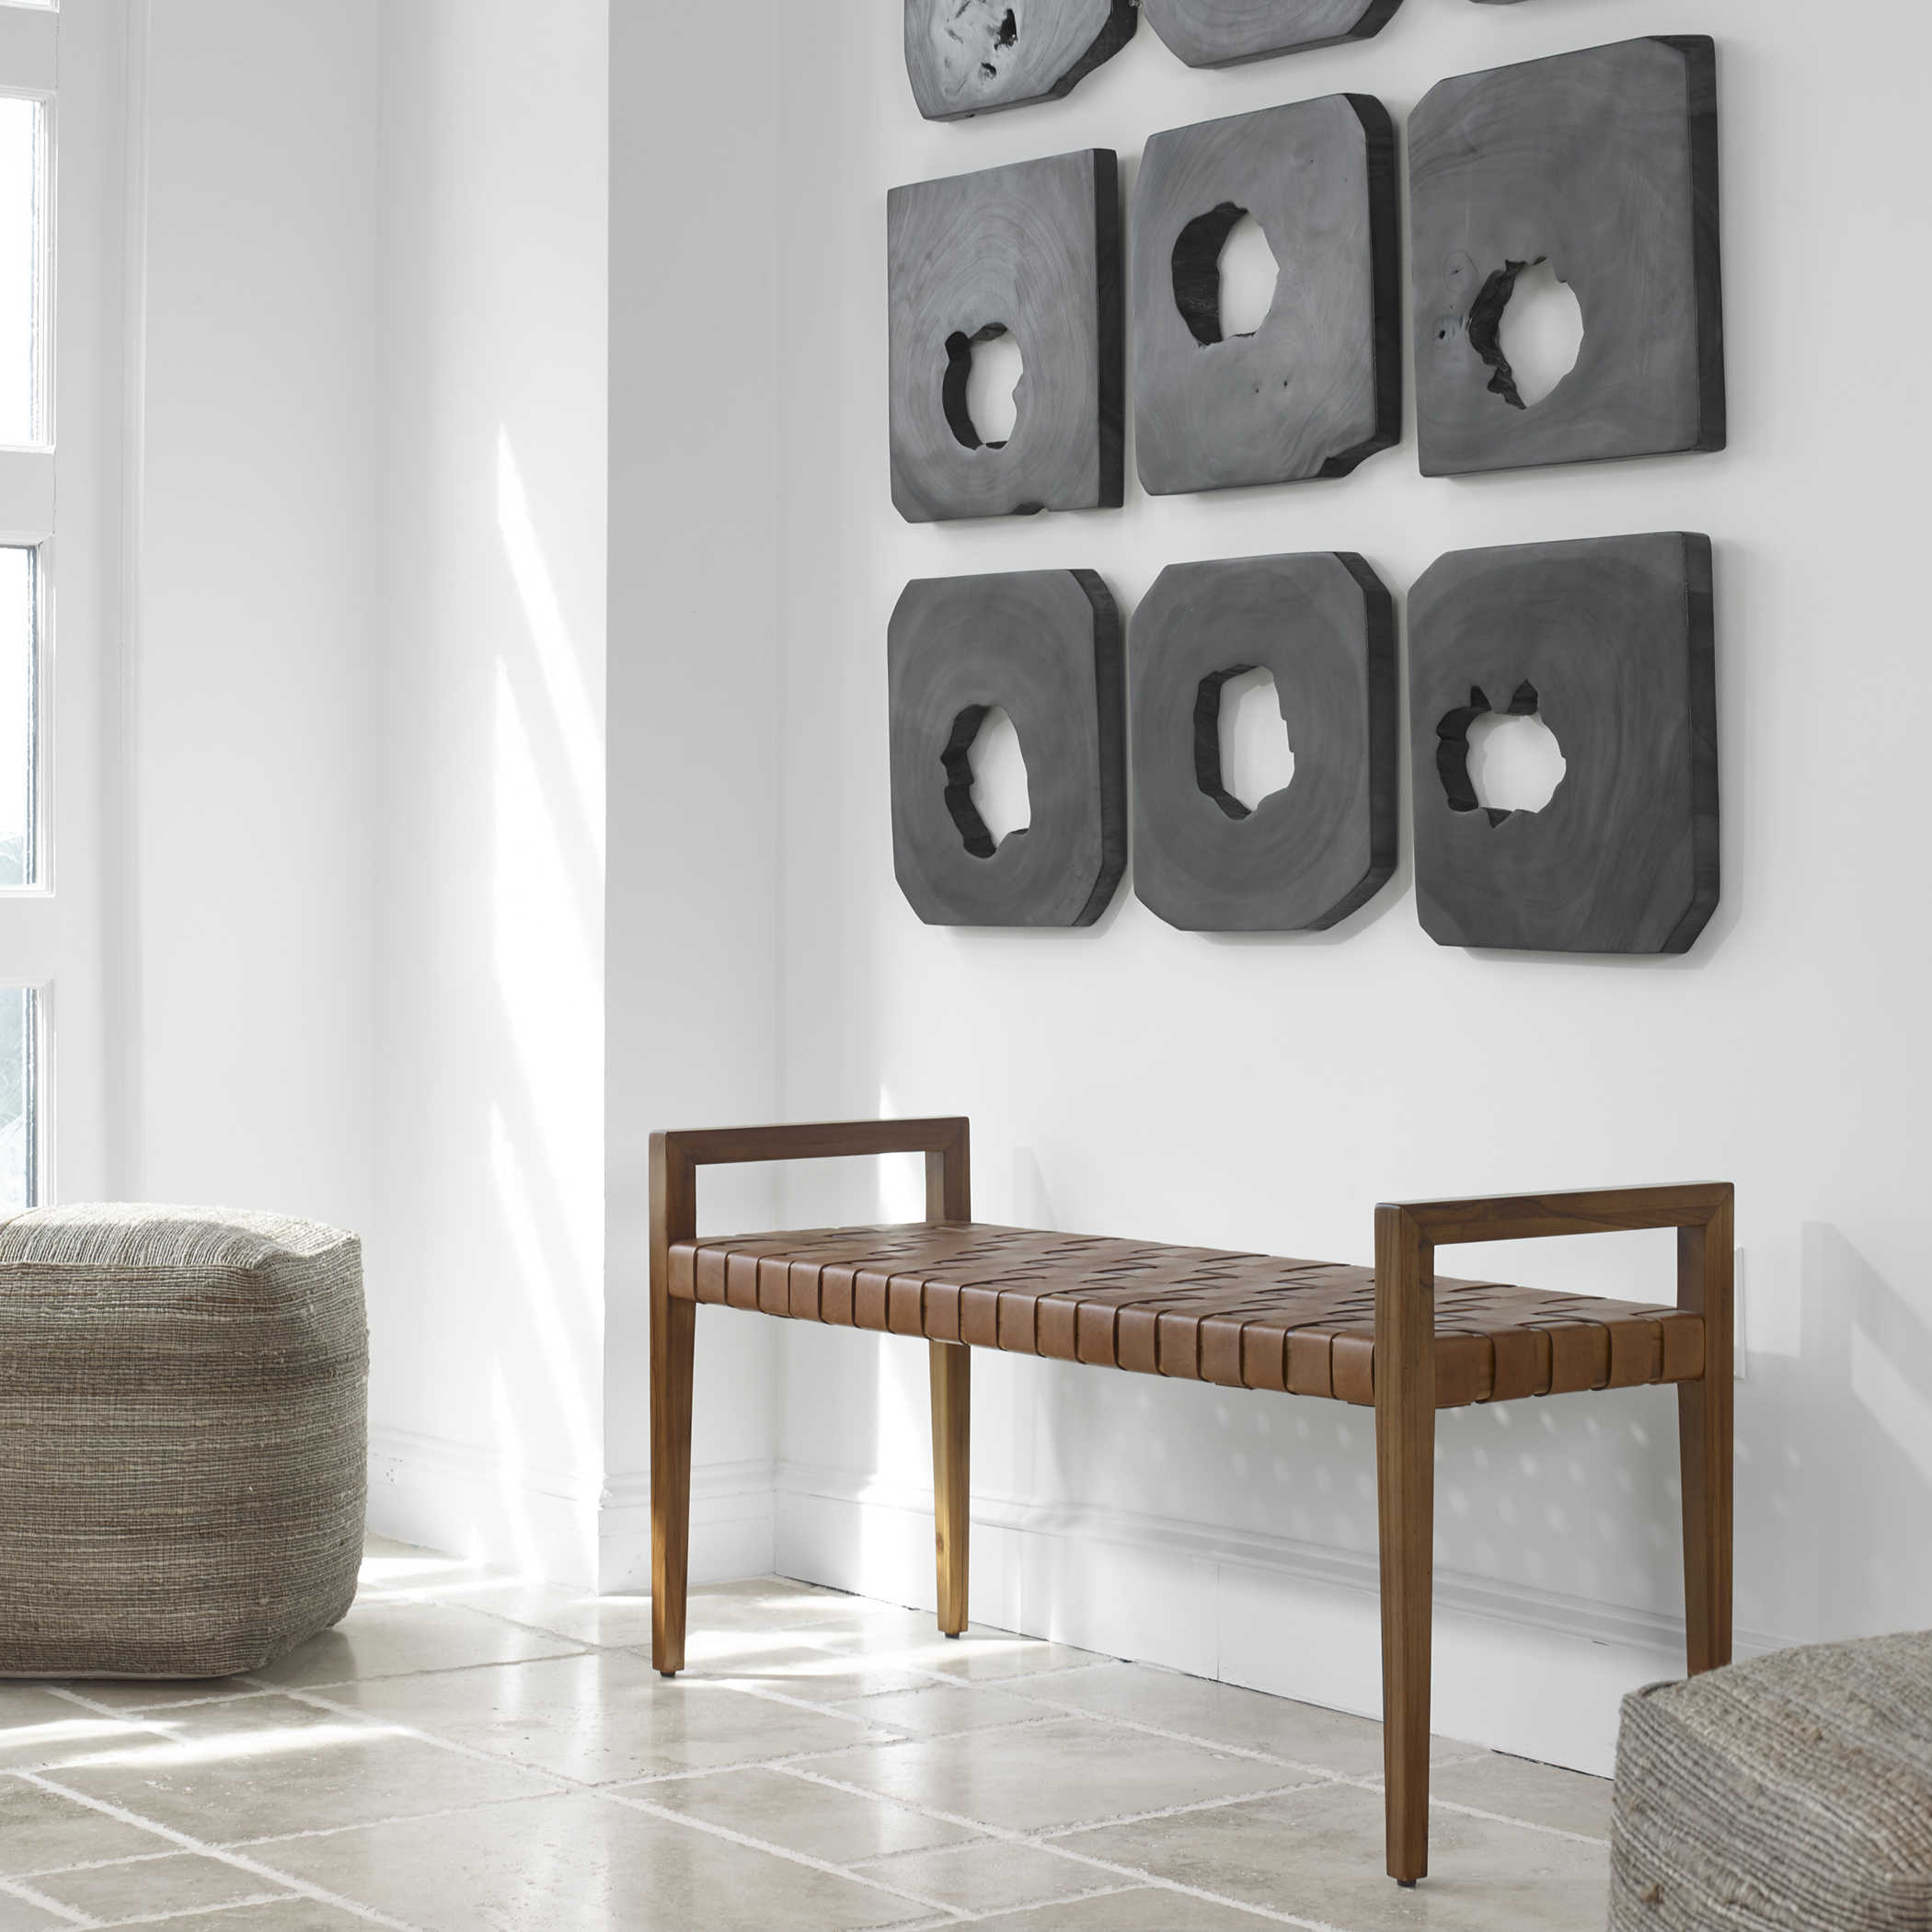 Decorate with leather benches. A plaited leather bench sits in an airy entryway. Soft cube ottomans surround the bench. A large sculptural grid or artwork hangs on the wall above it. 